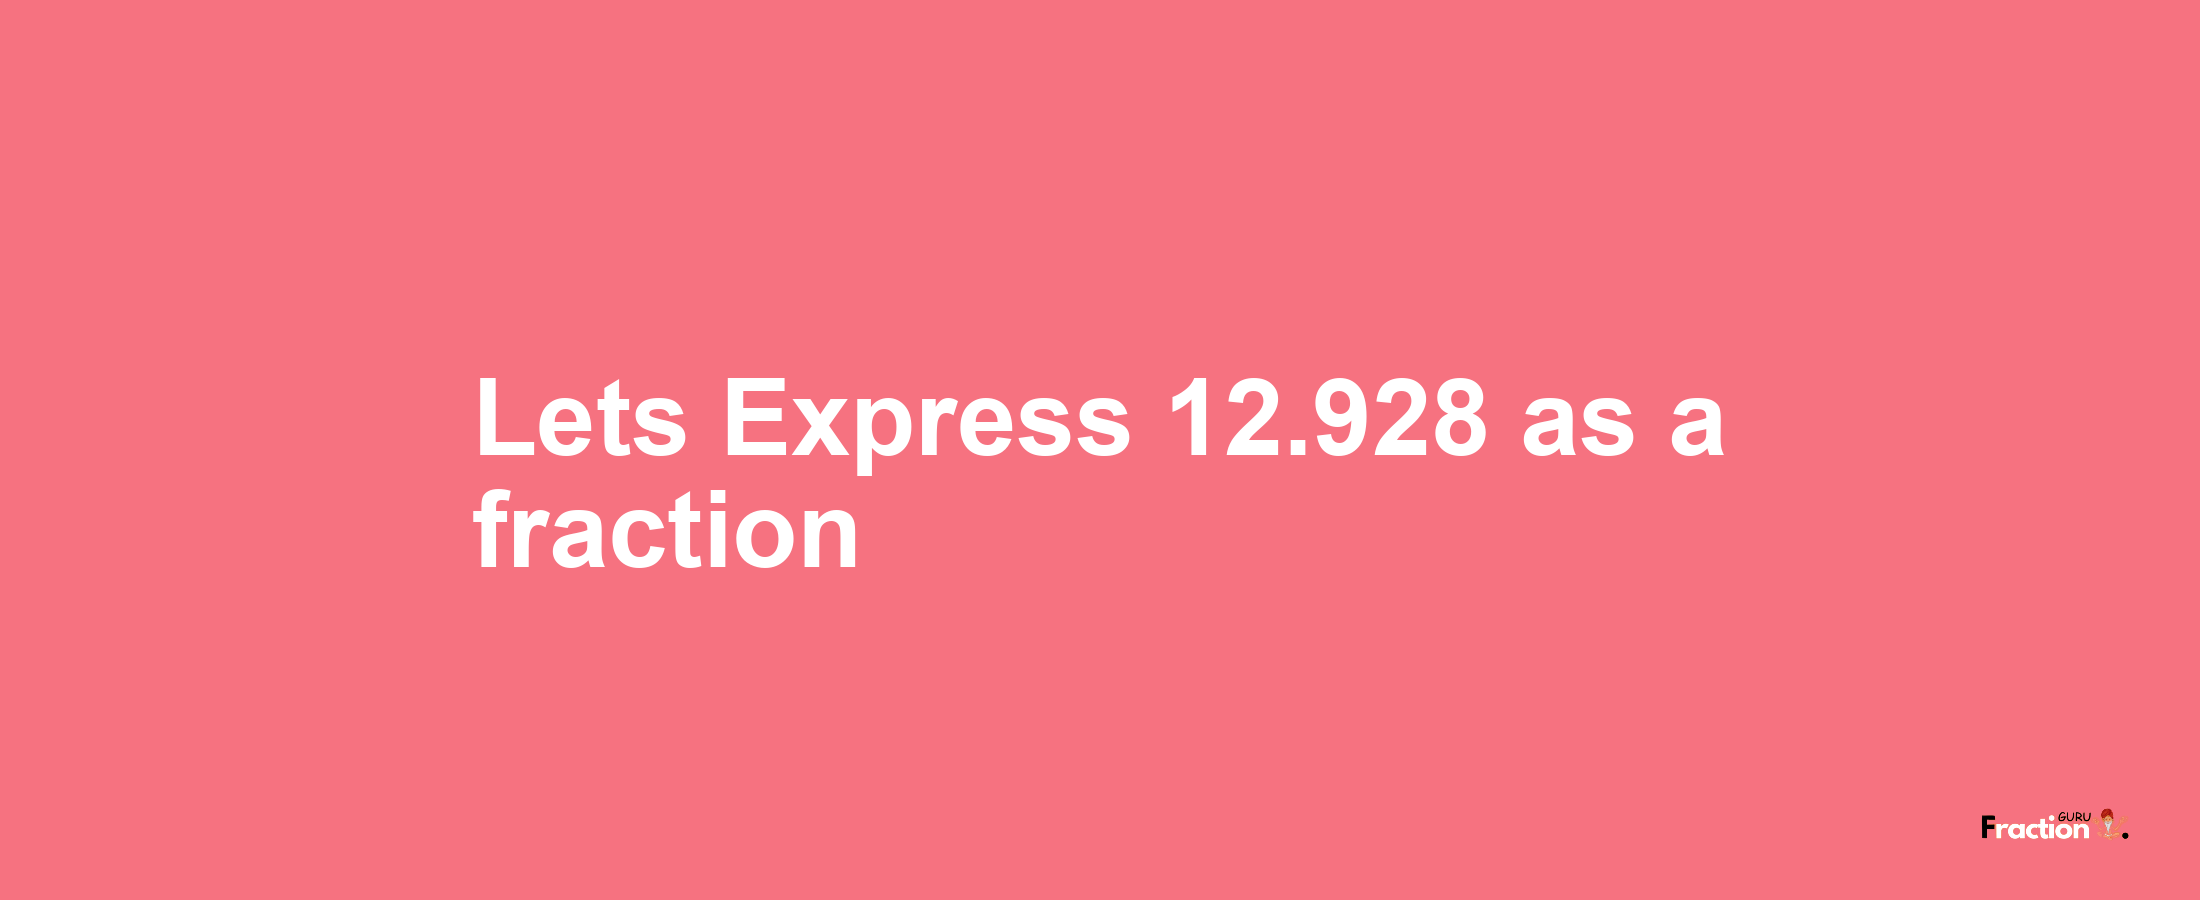 Lets Express 12.928 as afraction